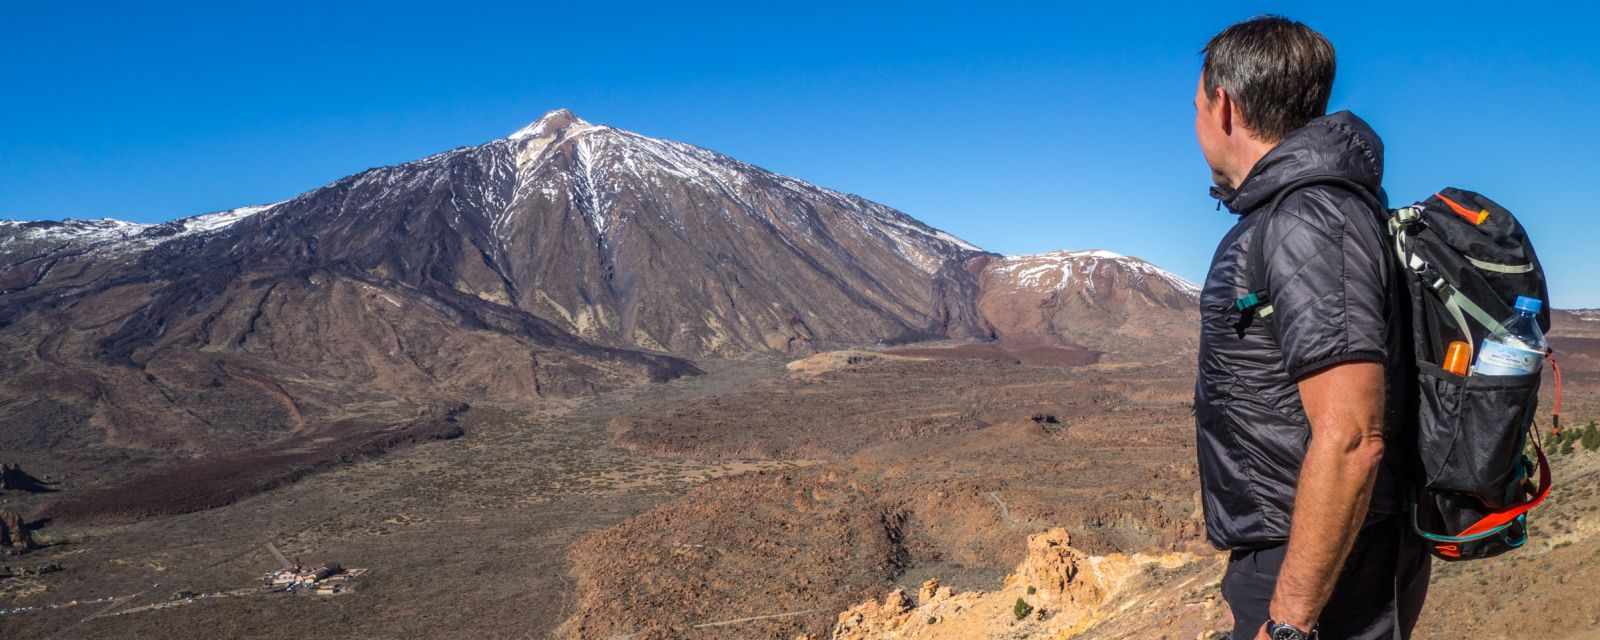 3 Must-Do Hikes at Mount Teide in Tenerife + 7 Tips